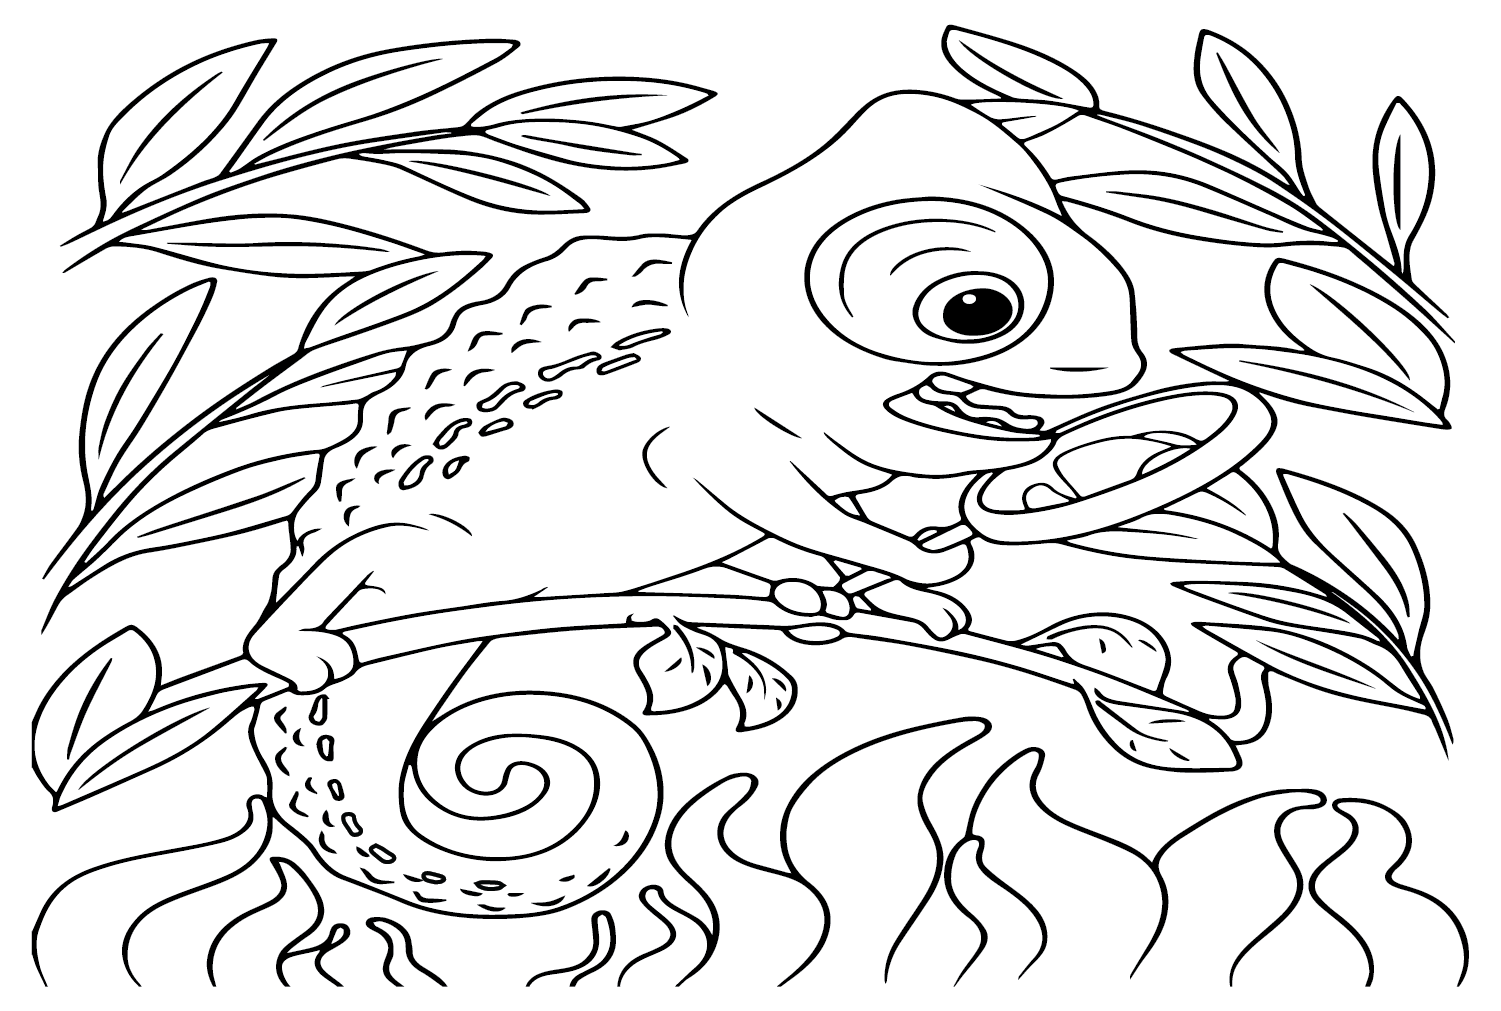 Coloring Pages Chameleon from Chameleon